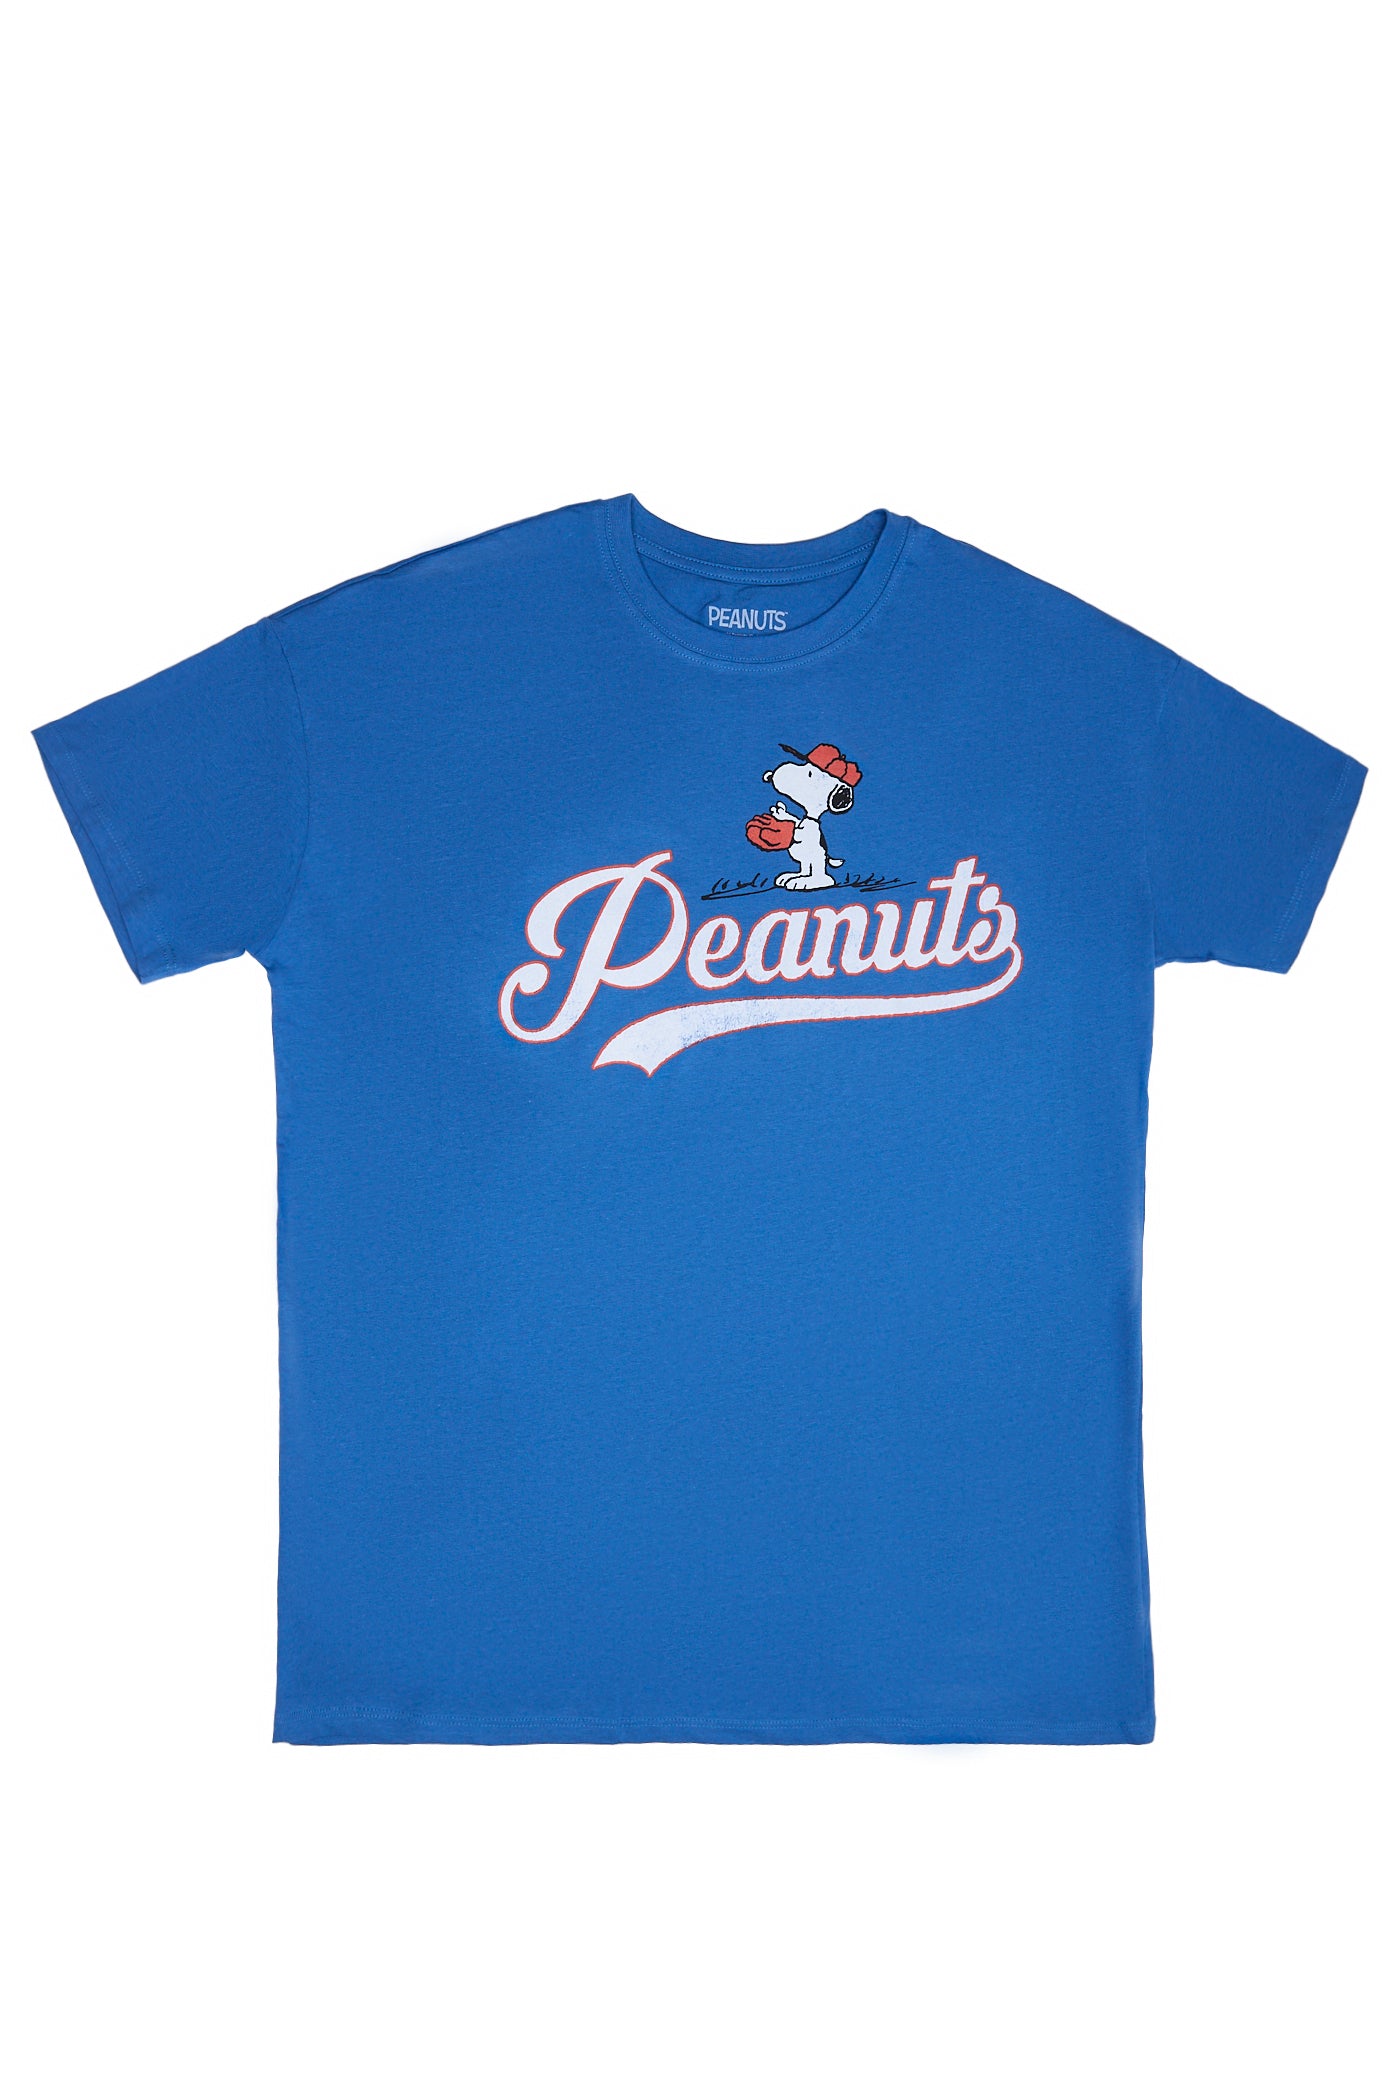 Peanuts Snoopy Baseball Graphic Relaxed Tee